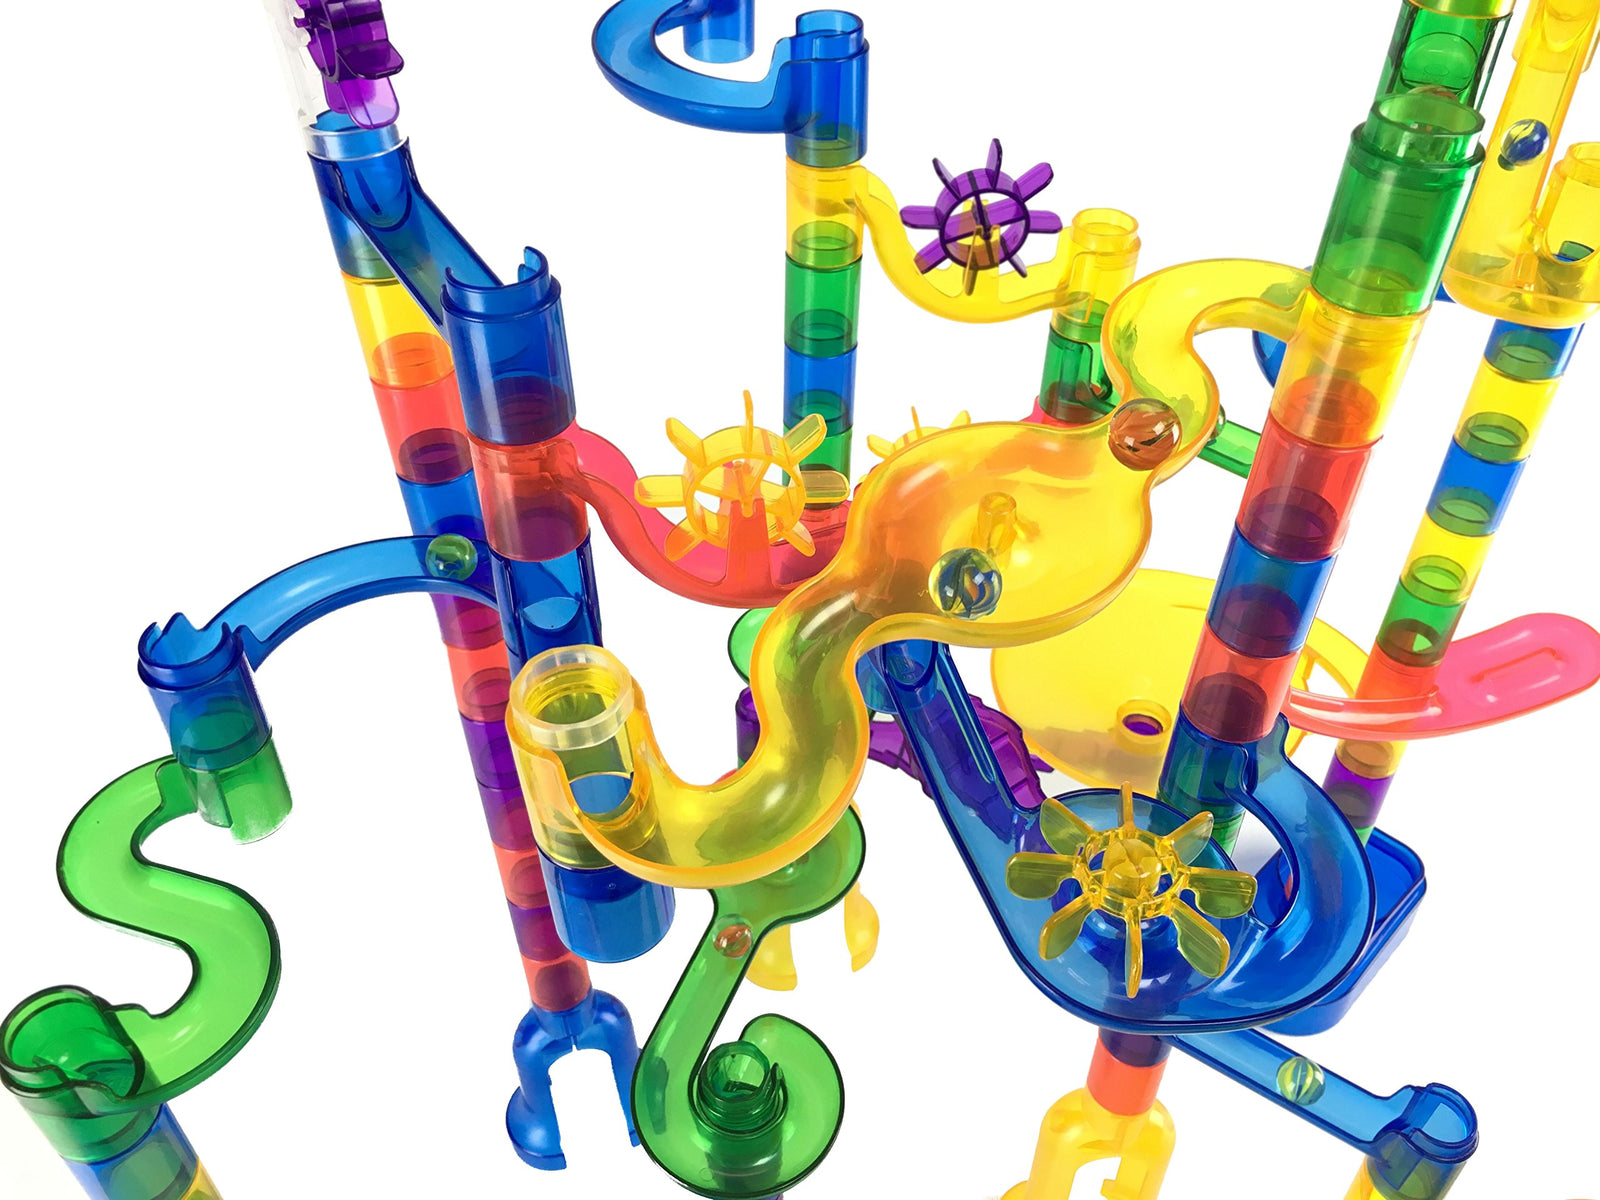 Marble Genius Marble Run Super Set - 150 Complete Pieces + Free Instruction App & Full Color Instruction Manual